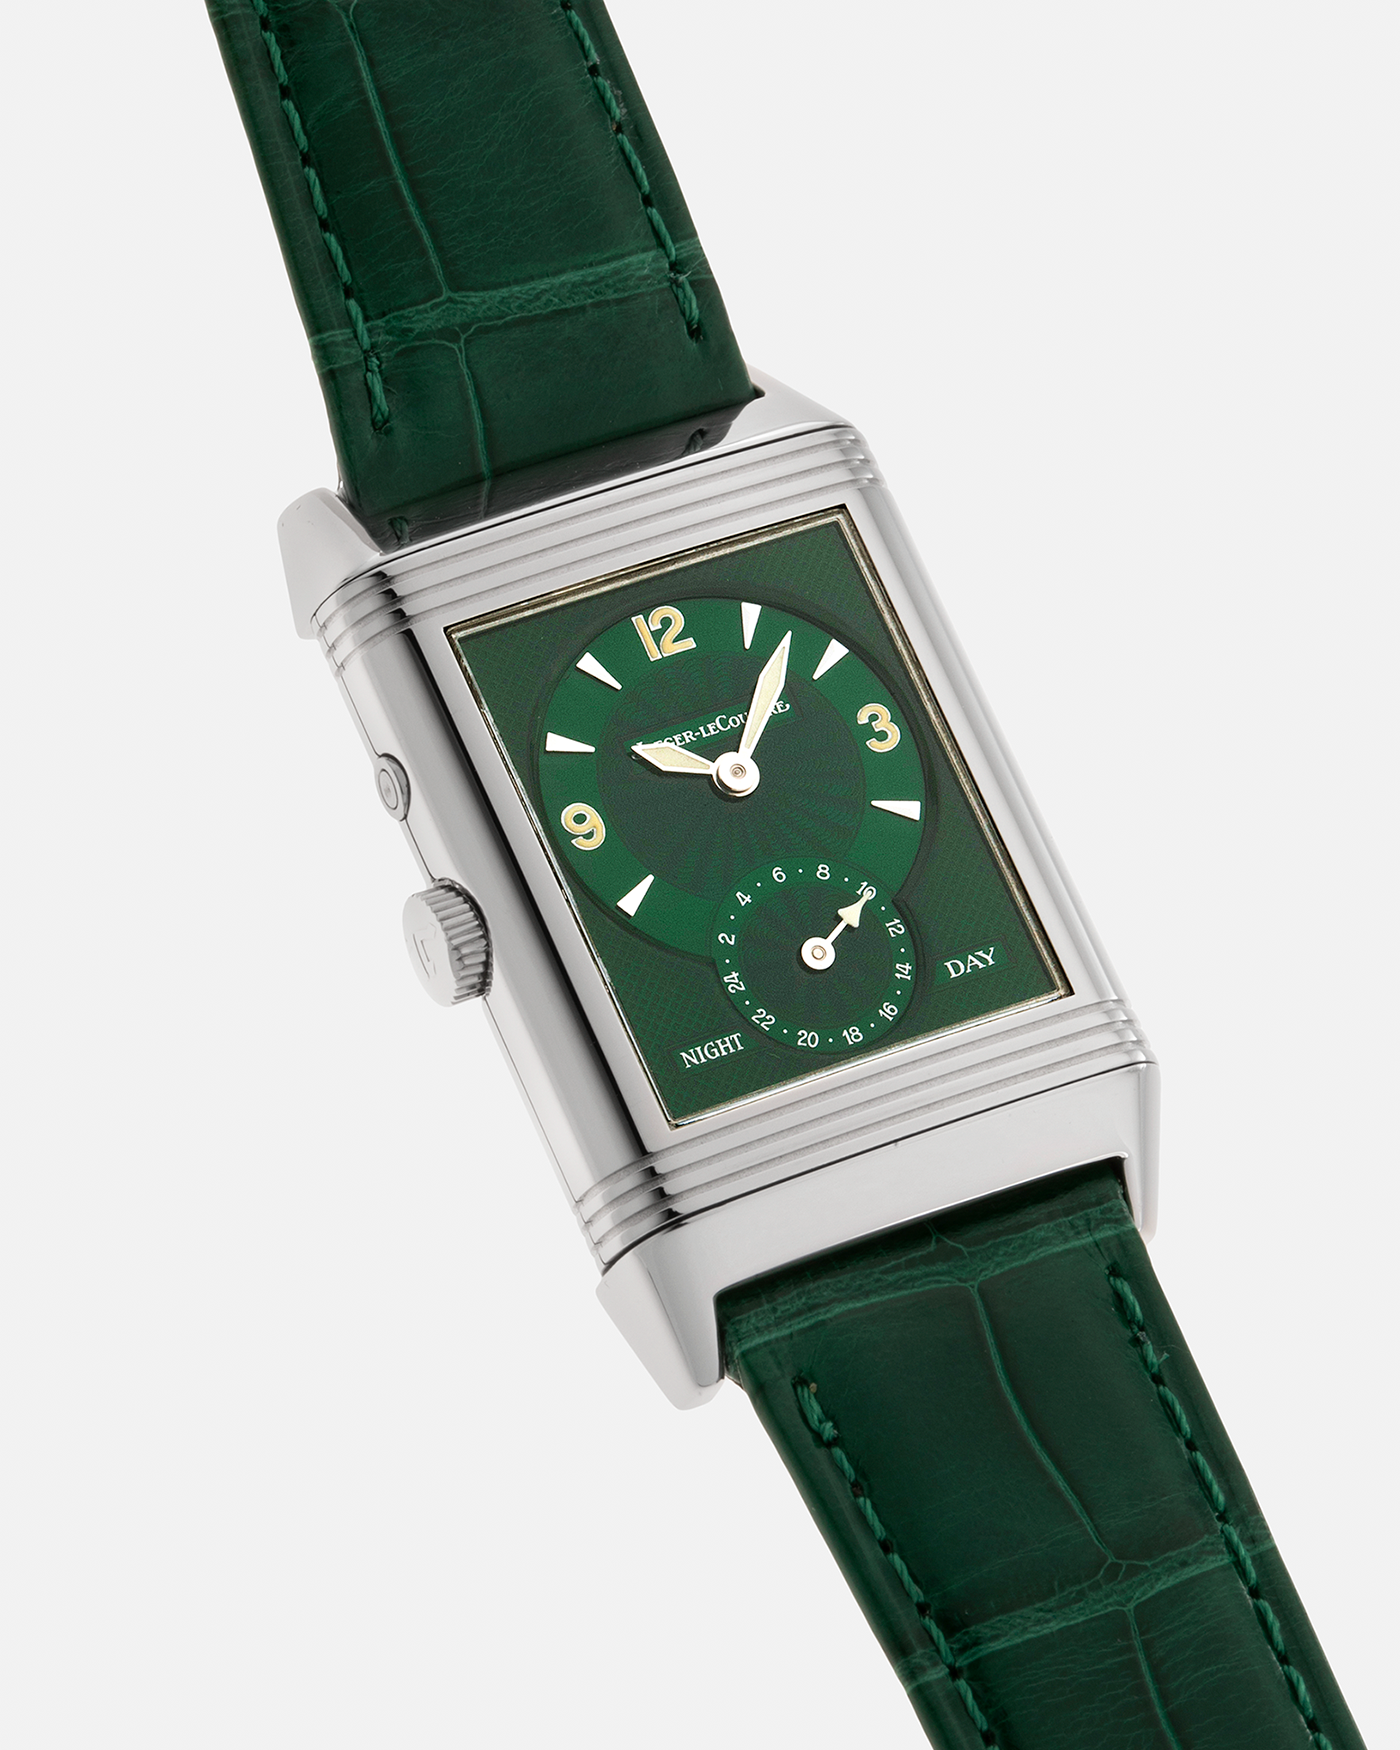 Brand: Jaeger LeCoultre Year: 1999 Model: Reverso Duoface Japan Edition Green, Limited Edition of 300 Pieces Reference Number: 270.8.54 Material: Stainless Steel Movement: Jaeger LeCoultre Cal. 854, Manual-Wind Case Diameter: 42mm x 26mm Lug Width: 19mm Strap: Jaeger LeCoultre Green Alligator Leather with Signed Stainless Steel Deployant Clasp